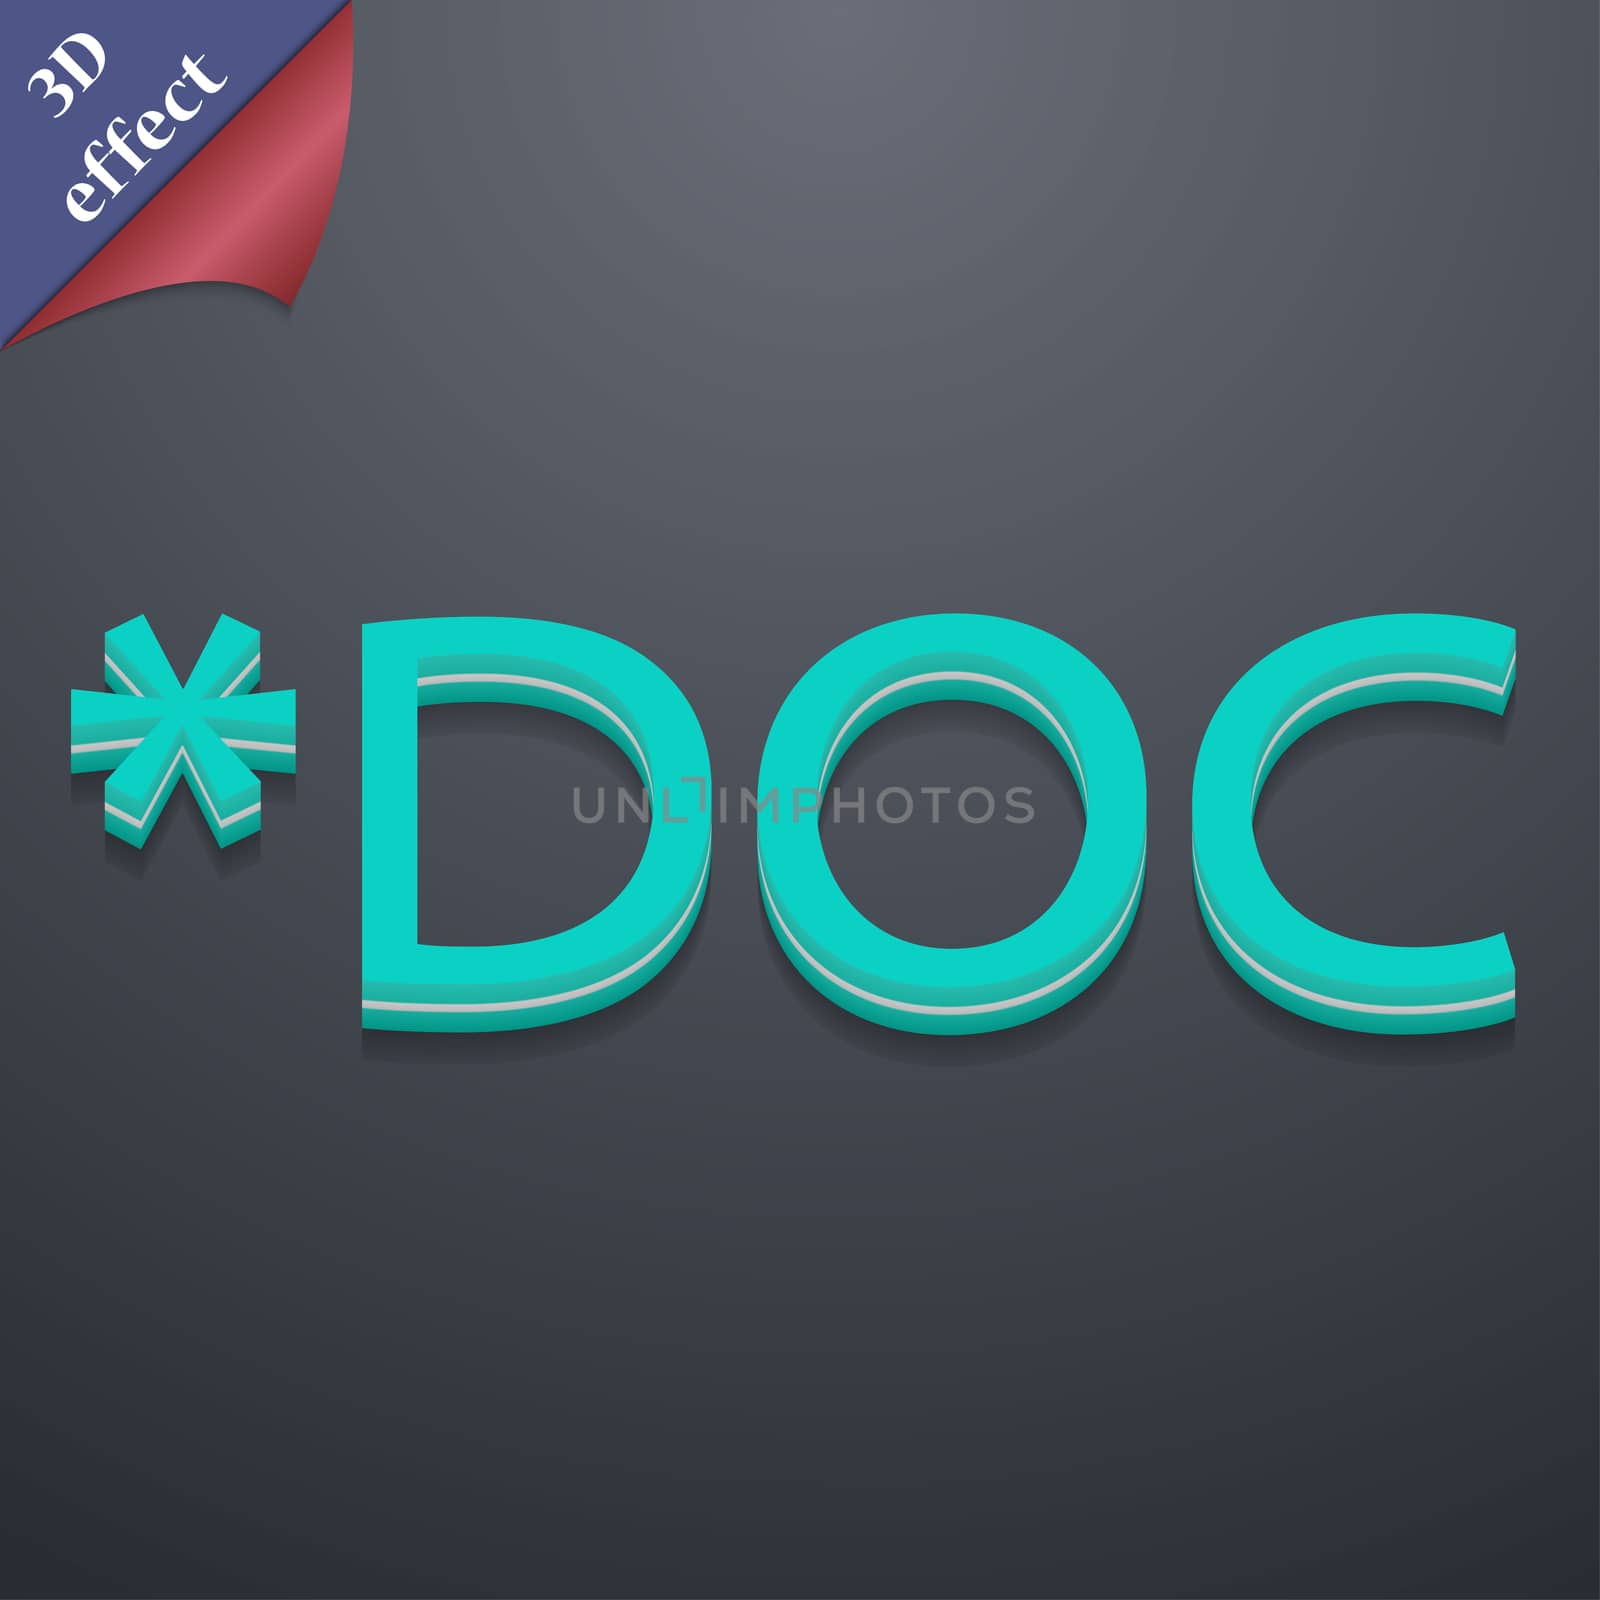 Doc file extension icon symbol. 3D style. Trendy, modern design with space for your text illustration. Rastrized copy